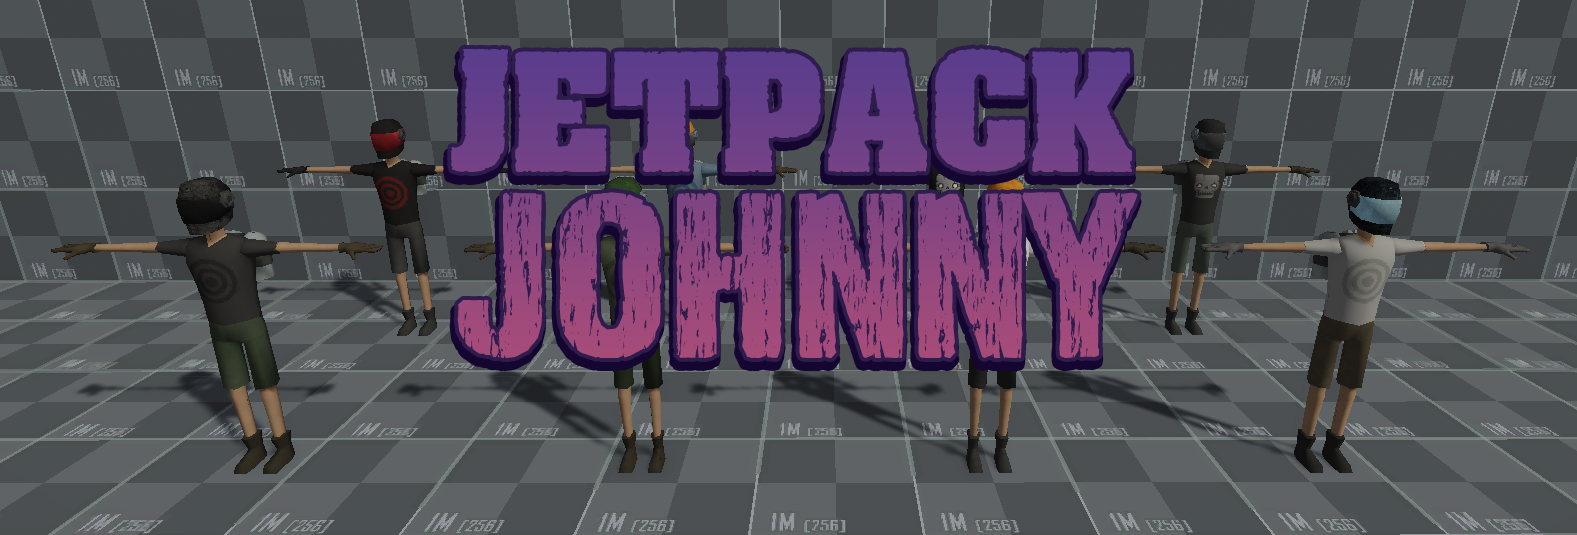 [Character] JETPACK JOHNNY